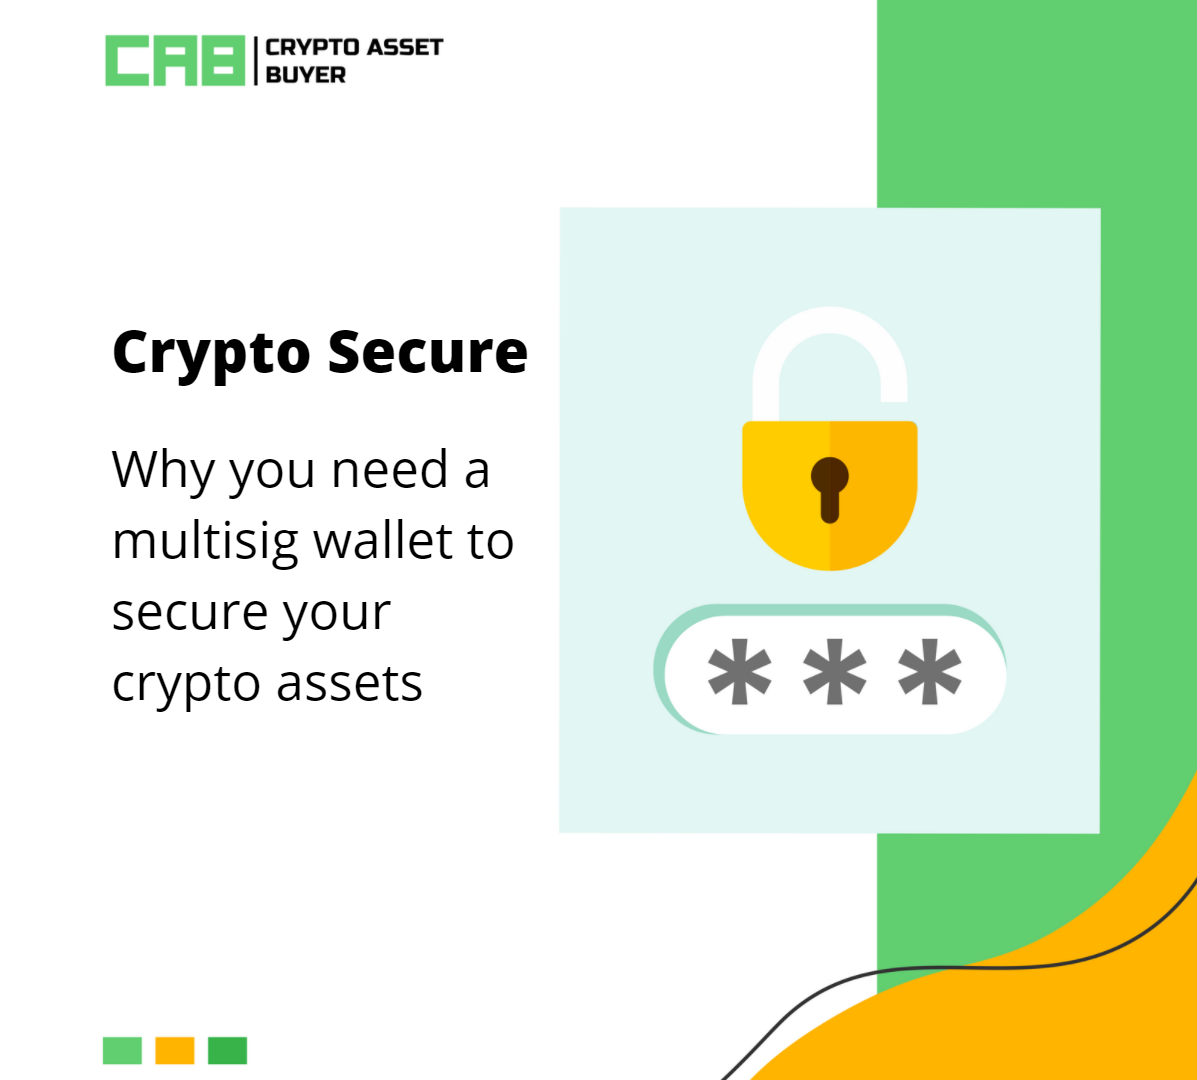 Why you need a multisig wallet to secure your crypto assets